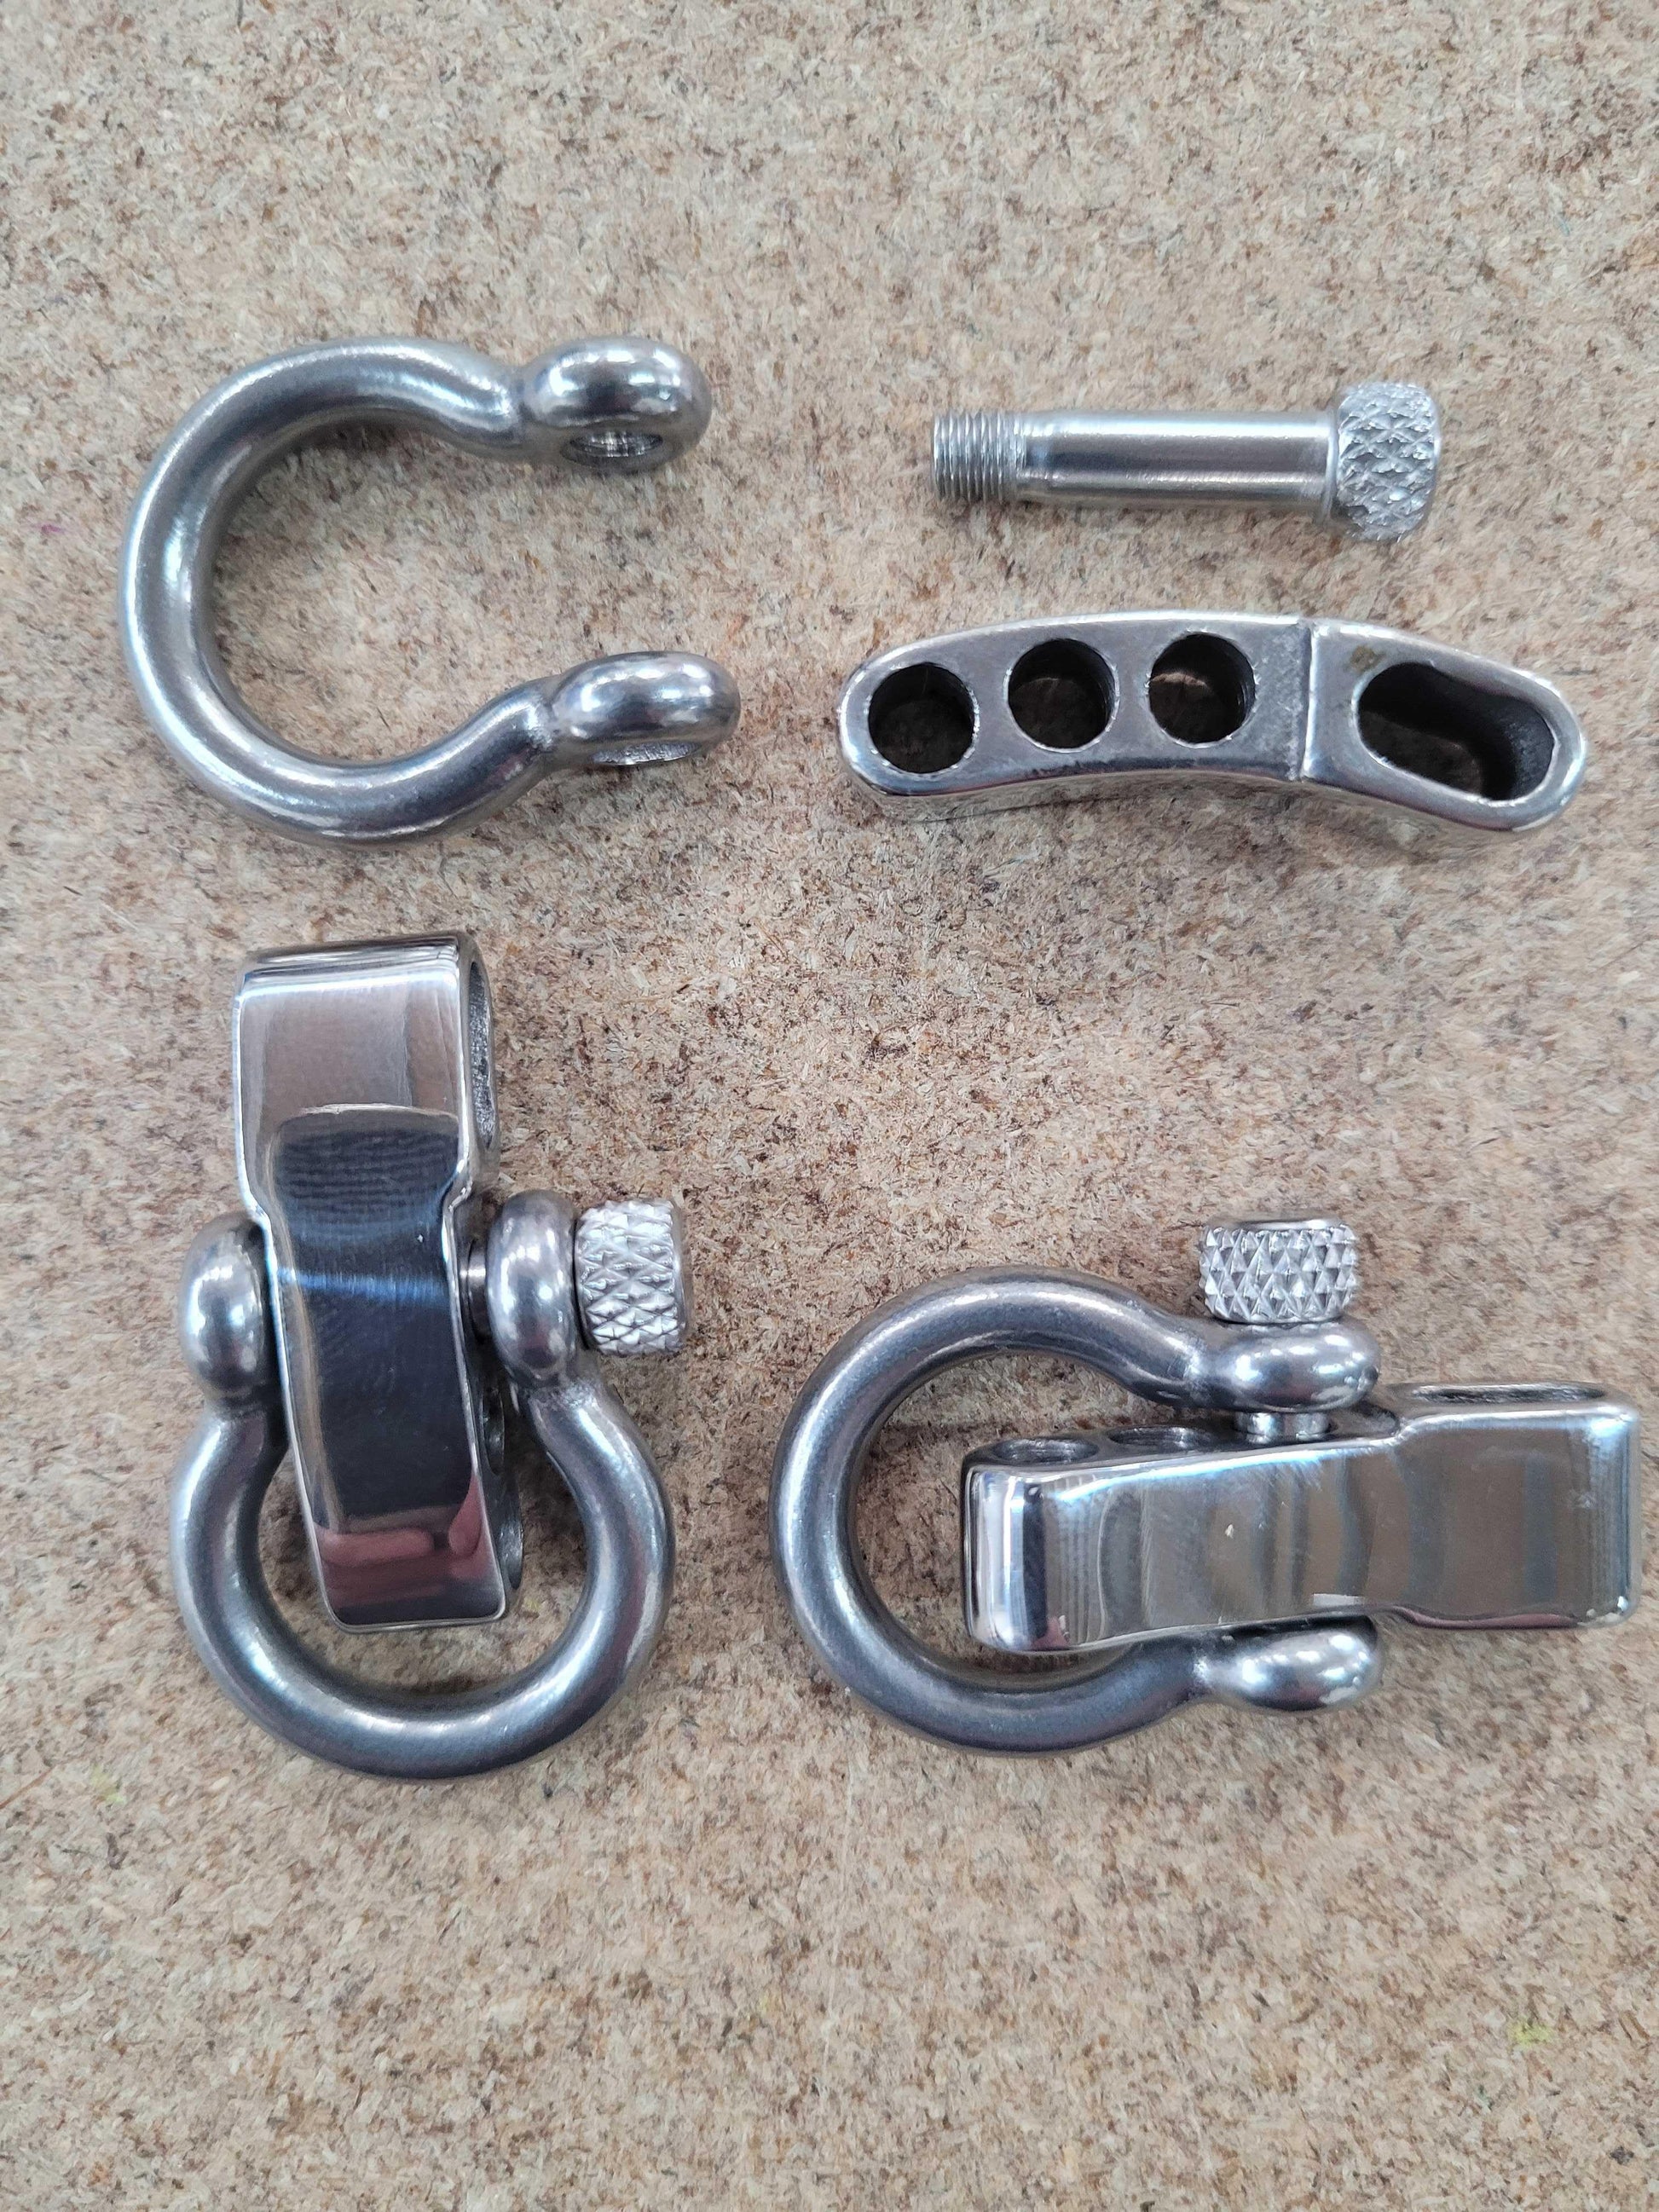 Adjustable Bar & Clevis Pin Bow shackle - Stainless Steel - Cams Cords